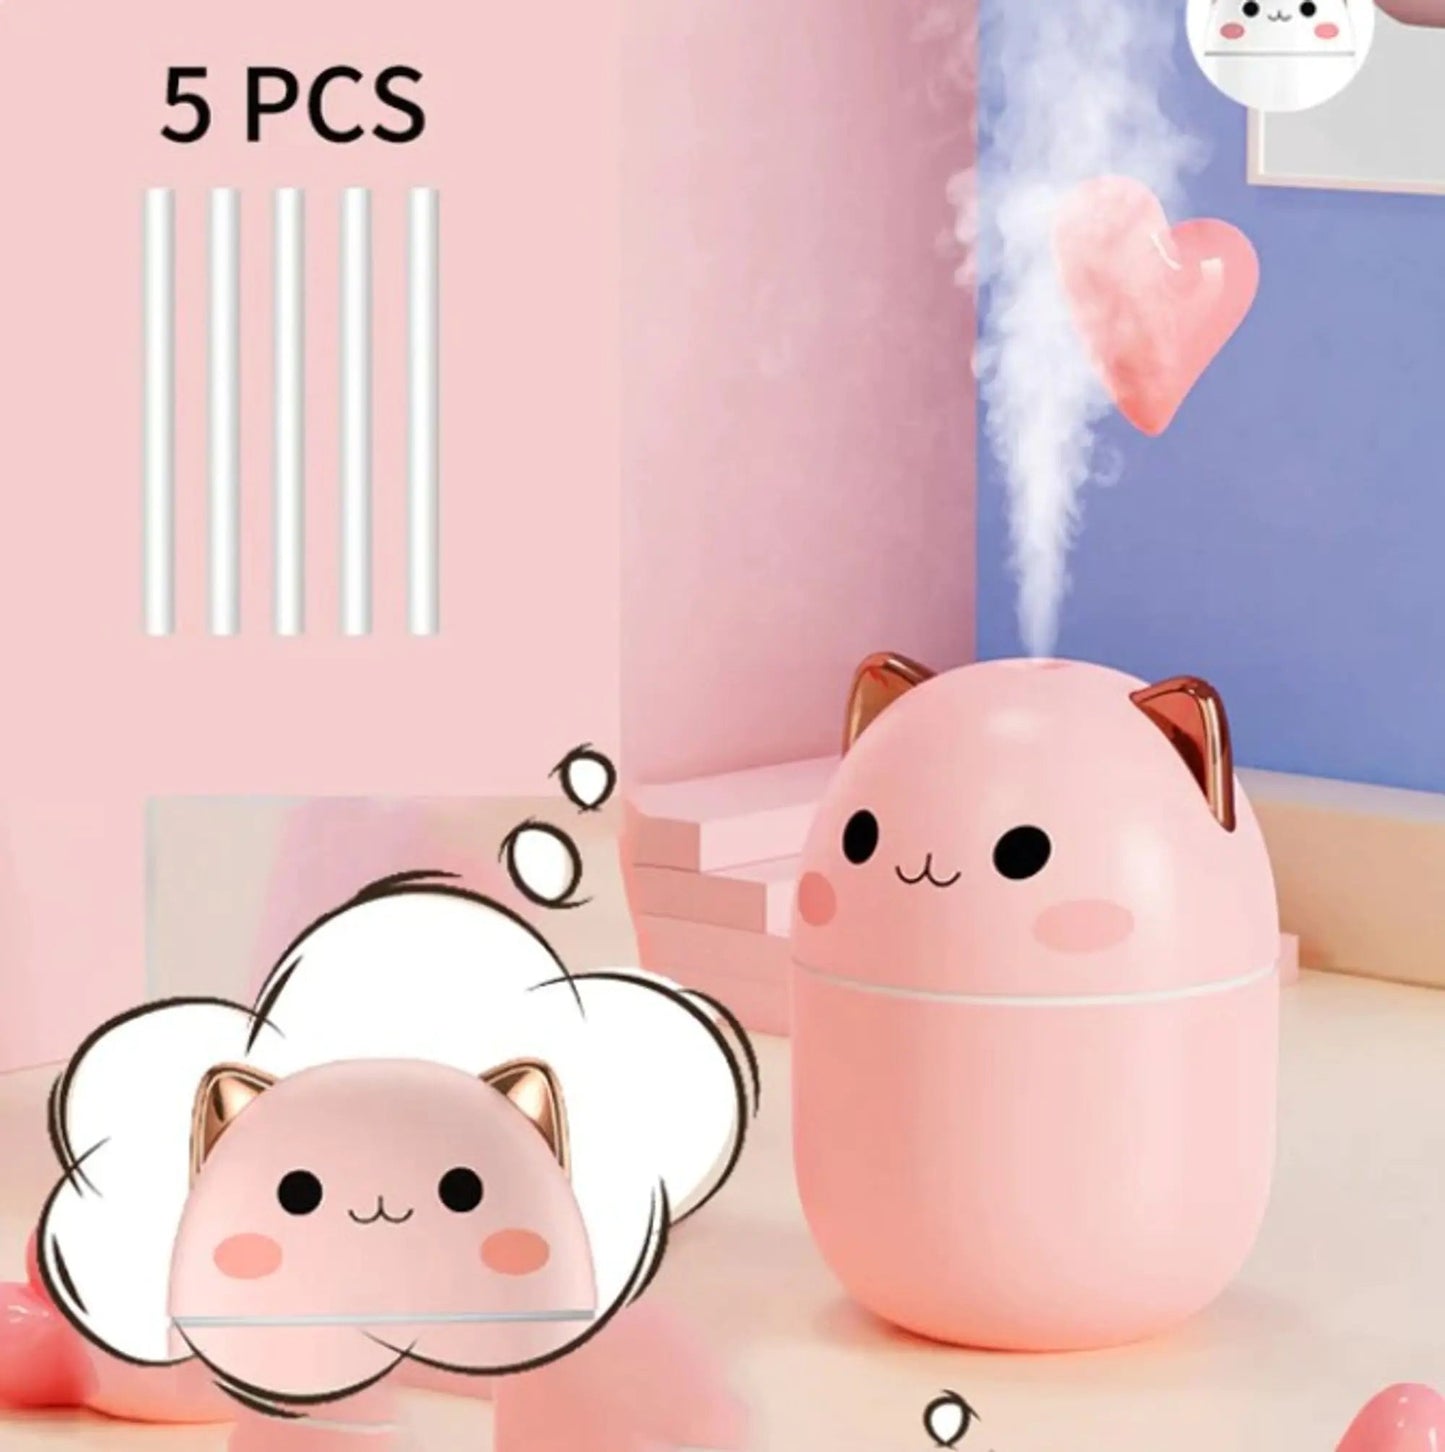 Say Goodbye to Dry Air with the Cute Cat Humidifier